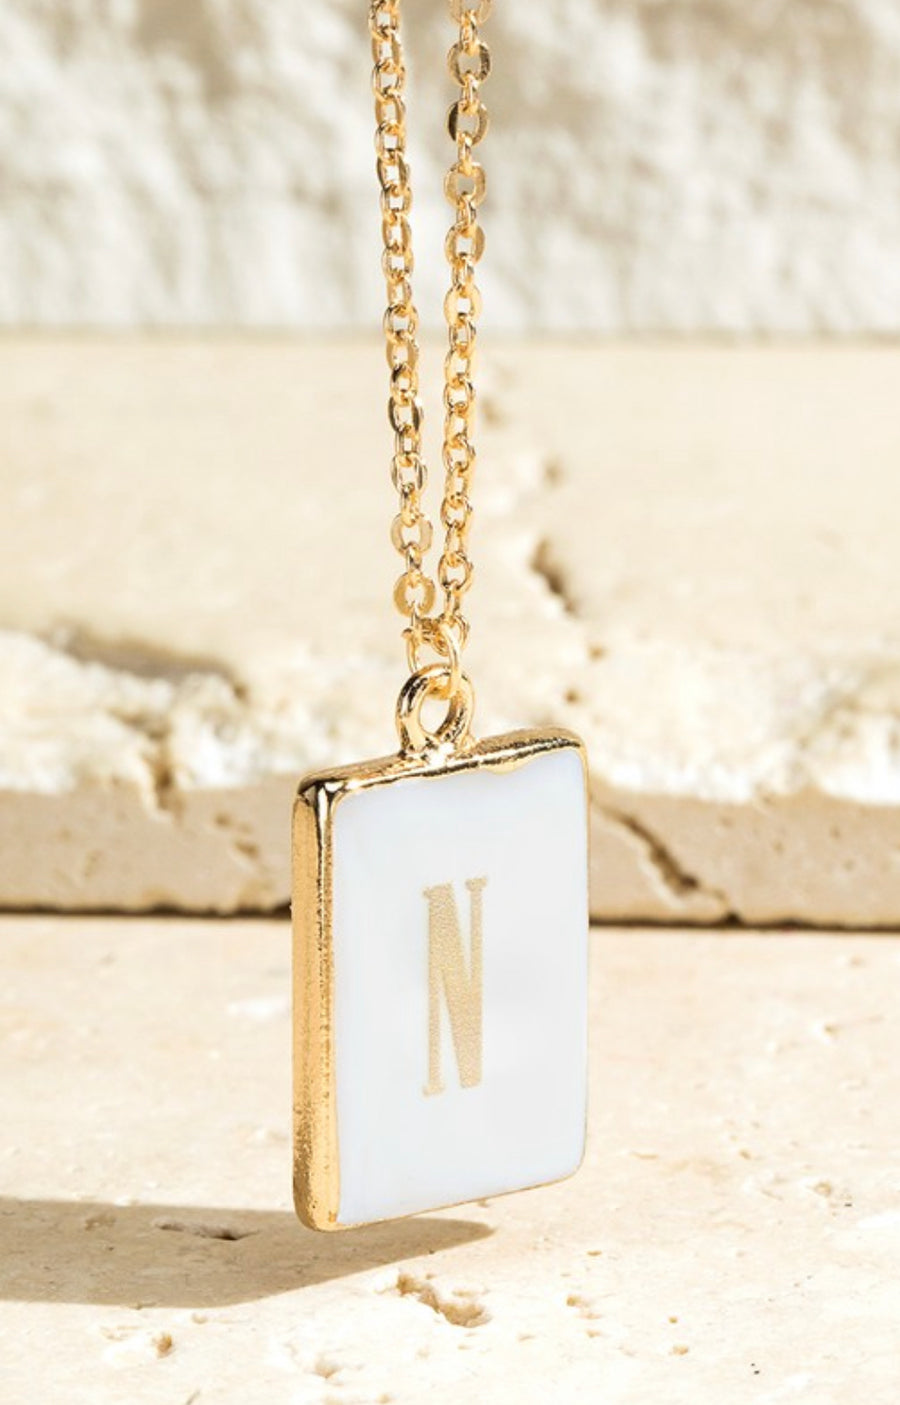 Gold and White Initial Square Necklaces